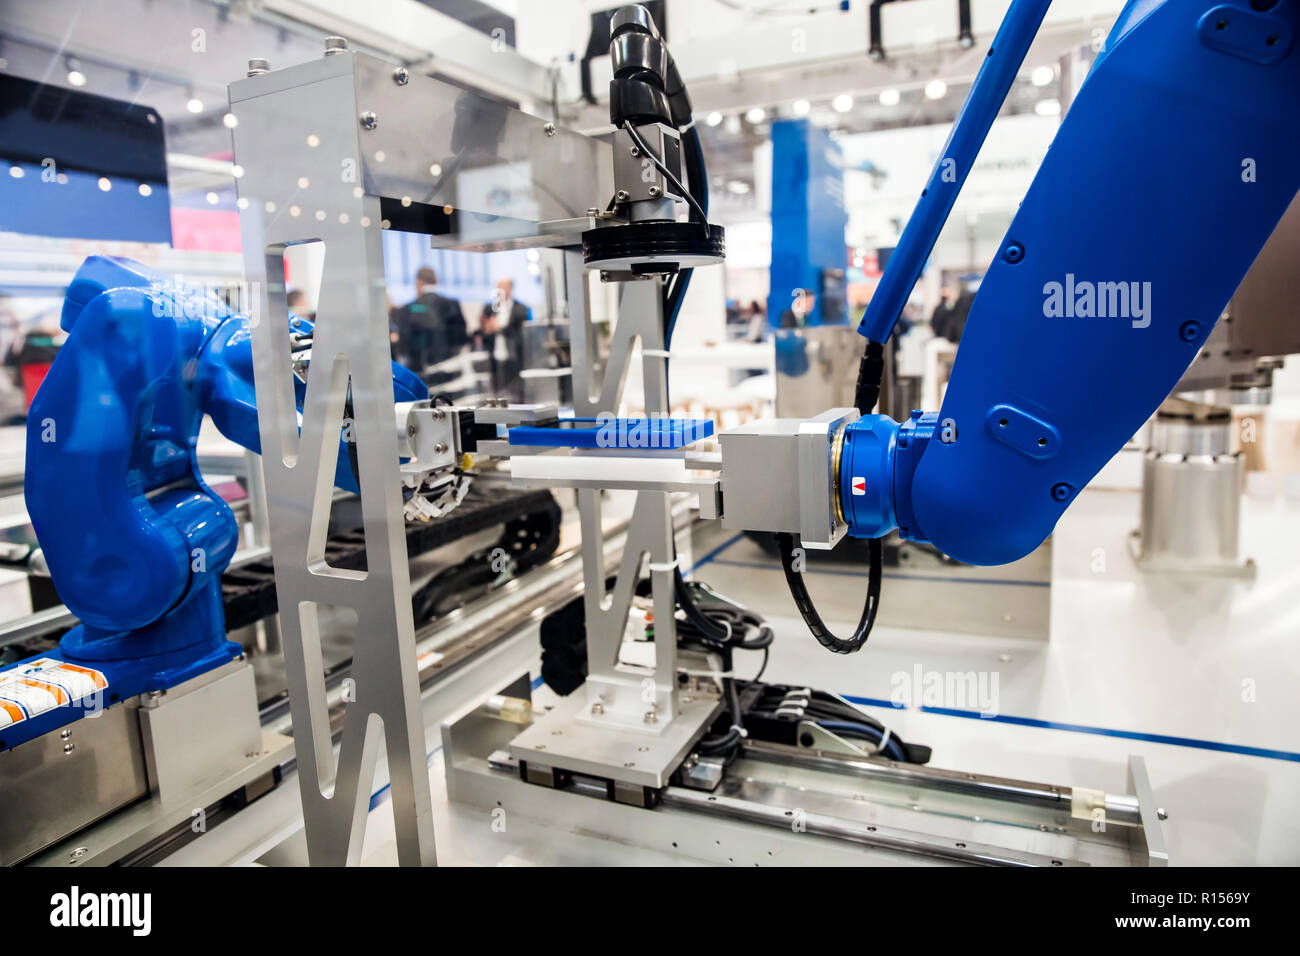 Robot arm in assembly line Stock Photo